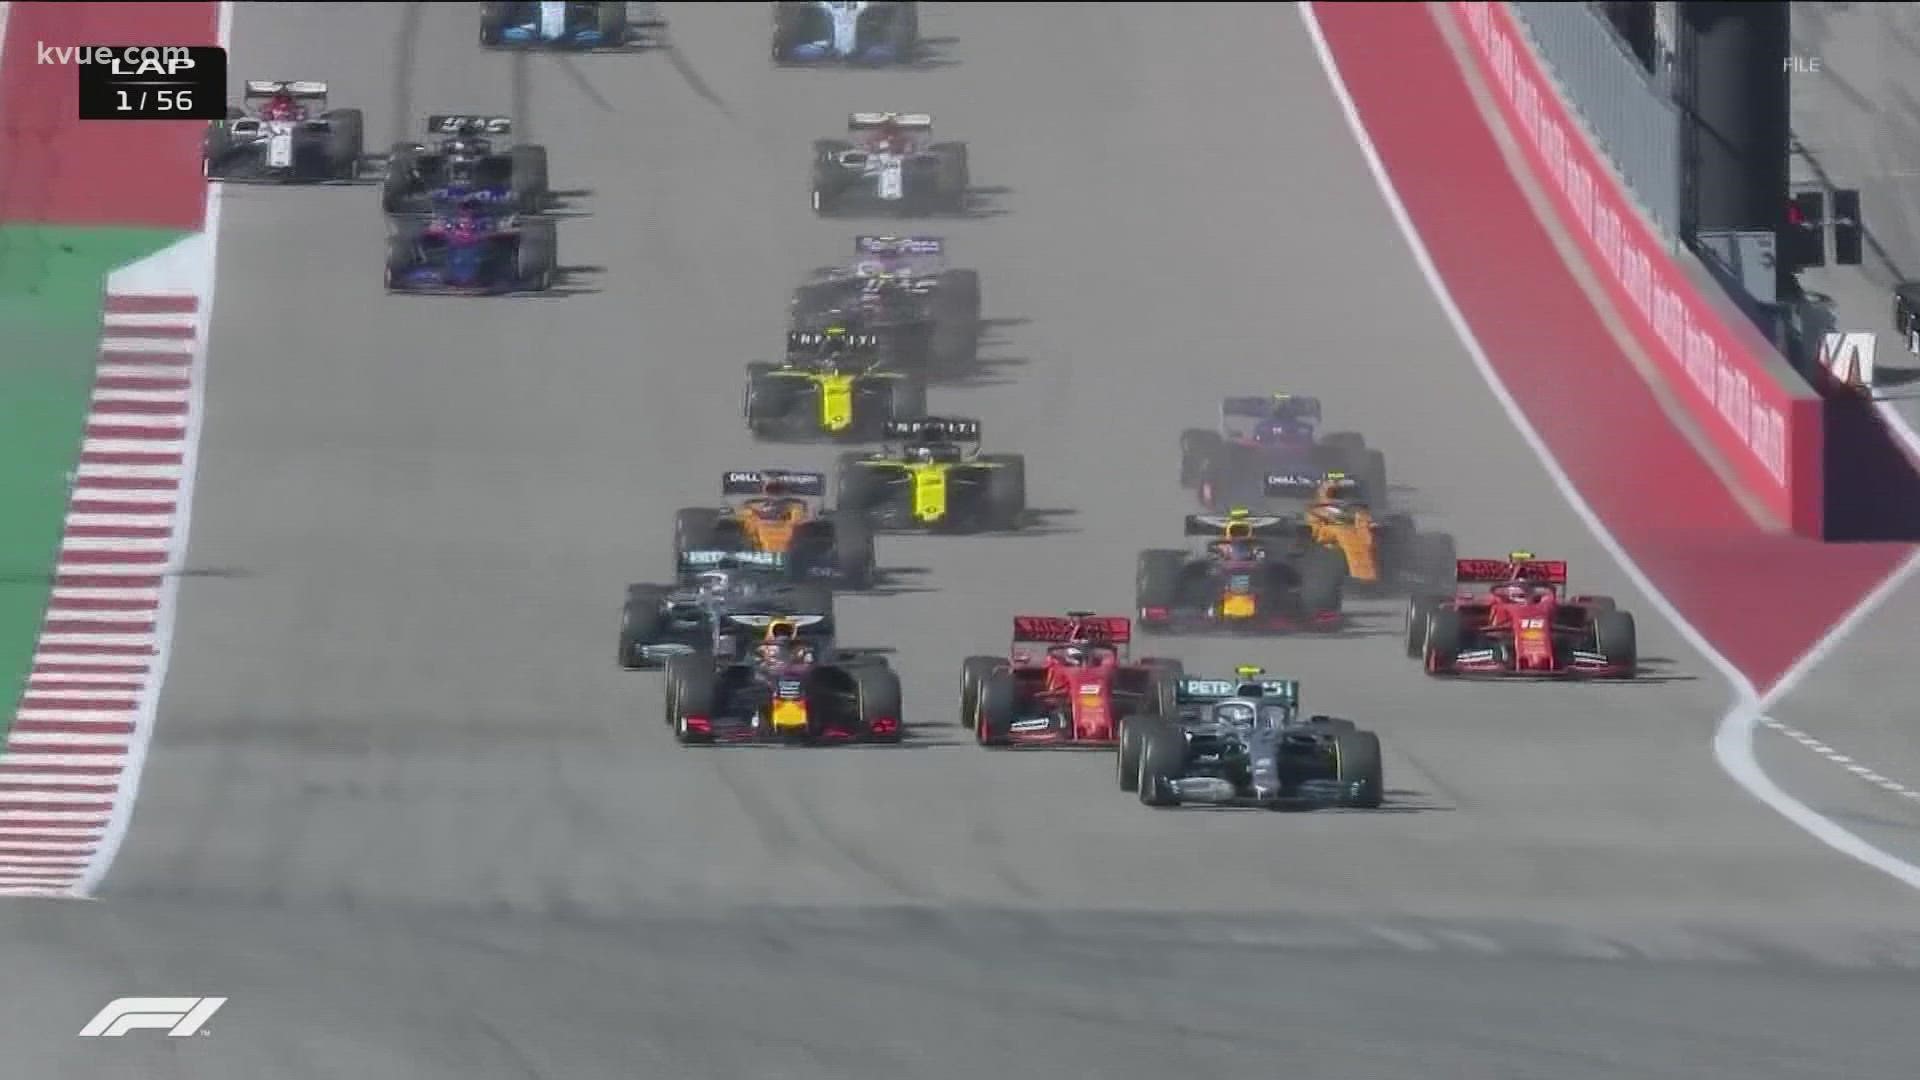 Regardless of who fans are rooting for this weekend, they agree that it's good to be back at COTA for the US Grand Prix.